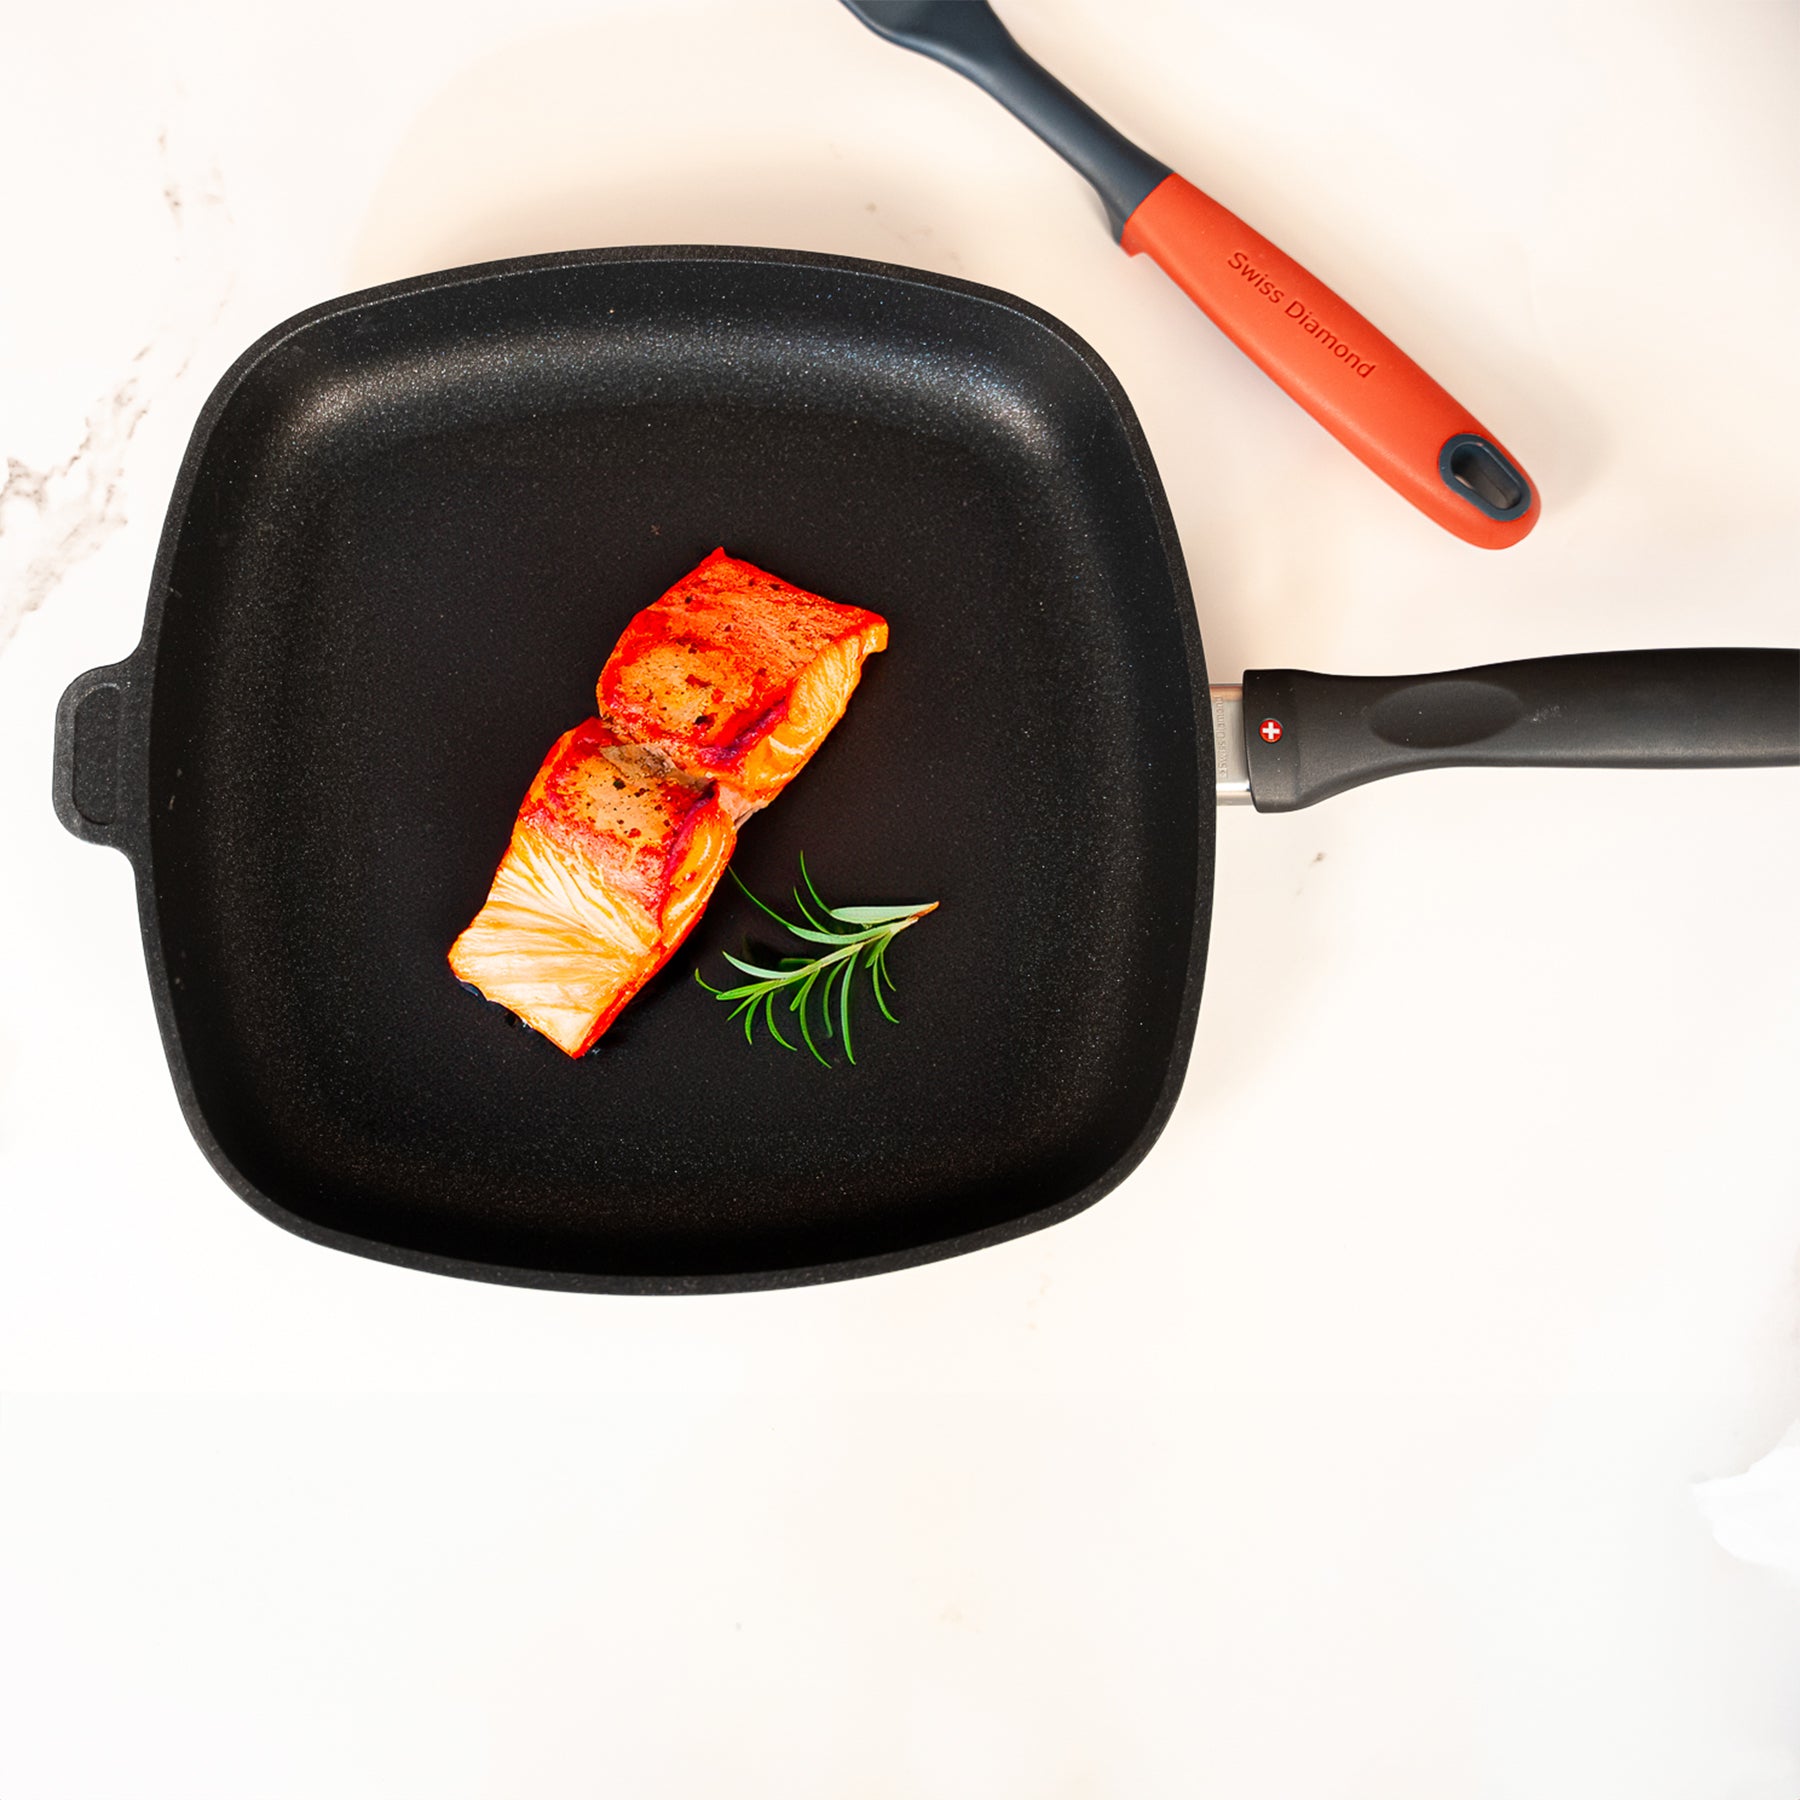 XD Nonstick 11" x 11" Square Fry Pan in use with cooked salmon on surface